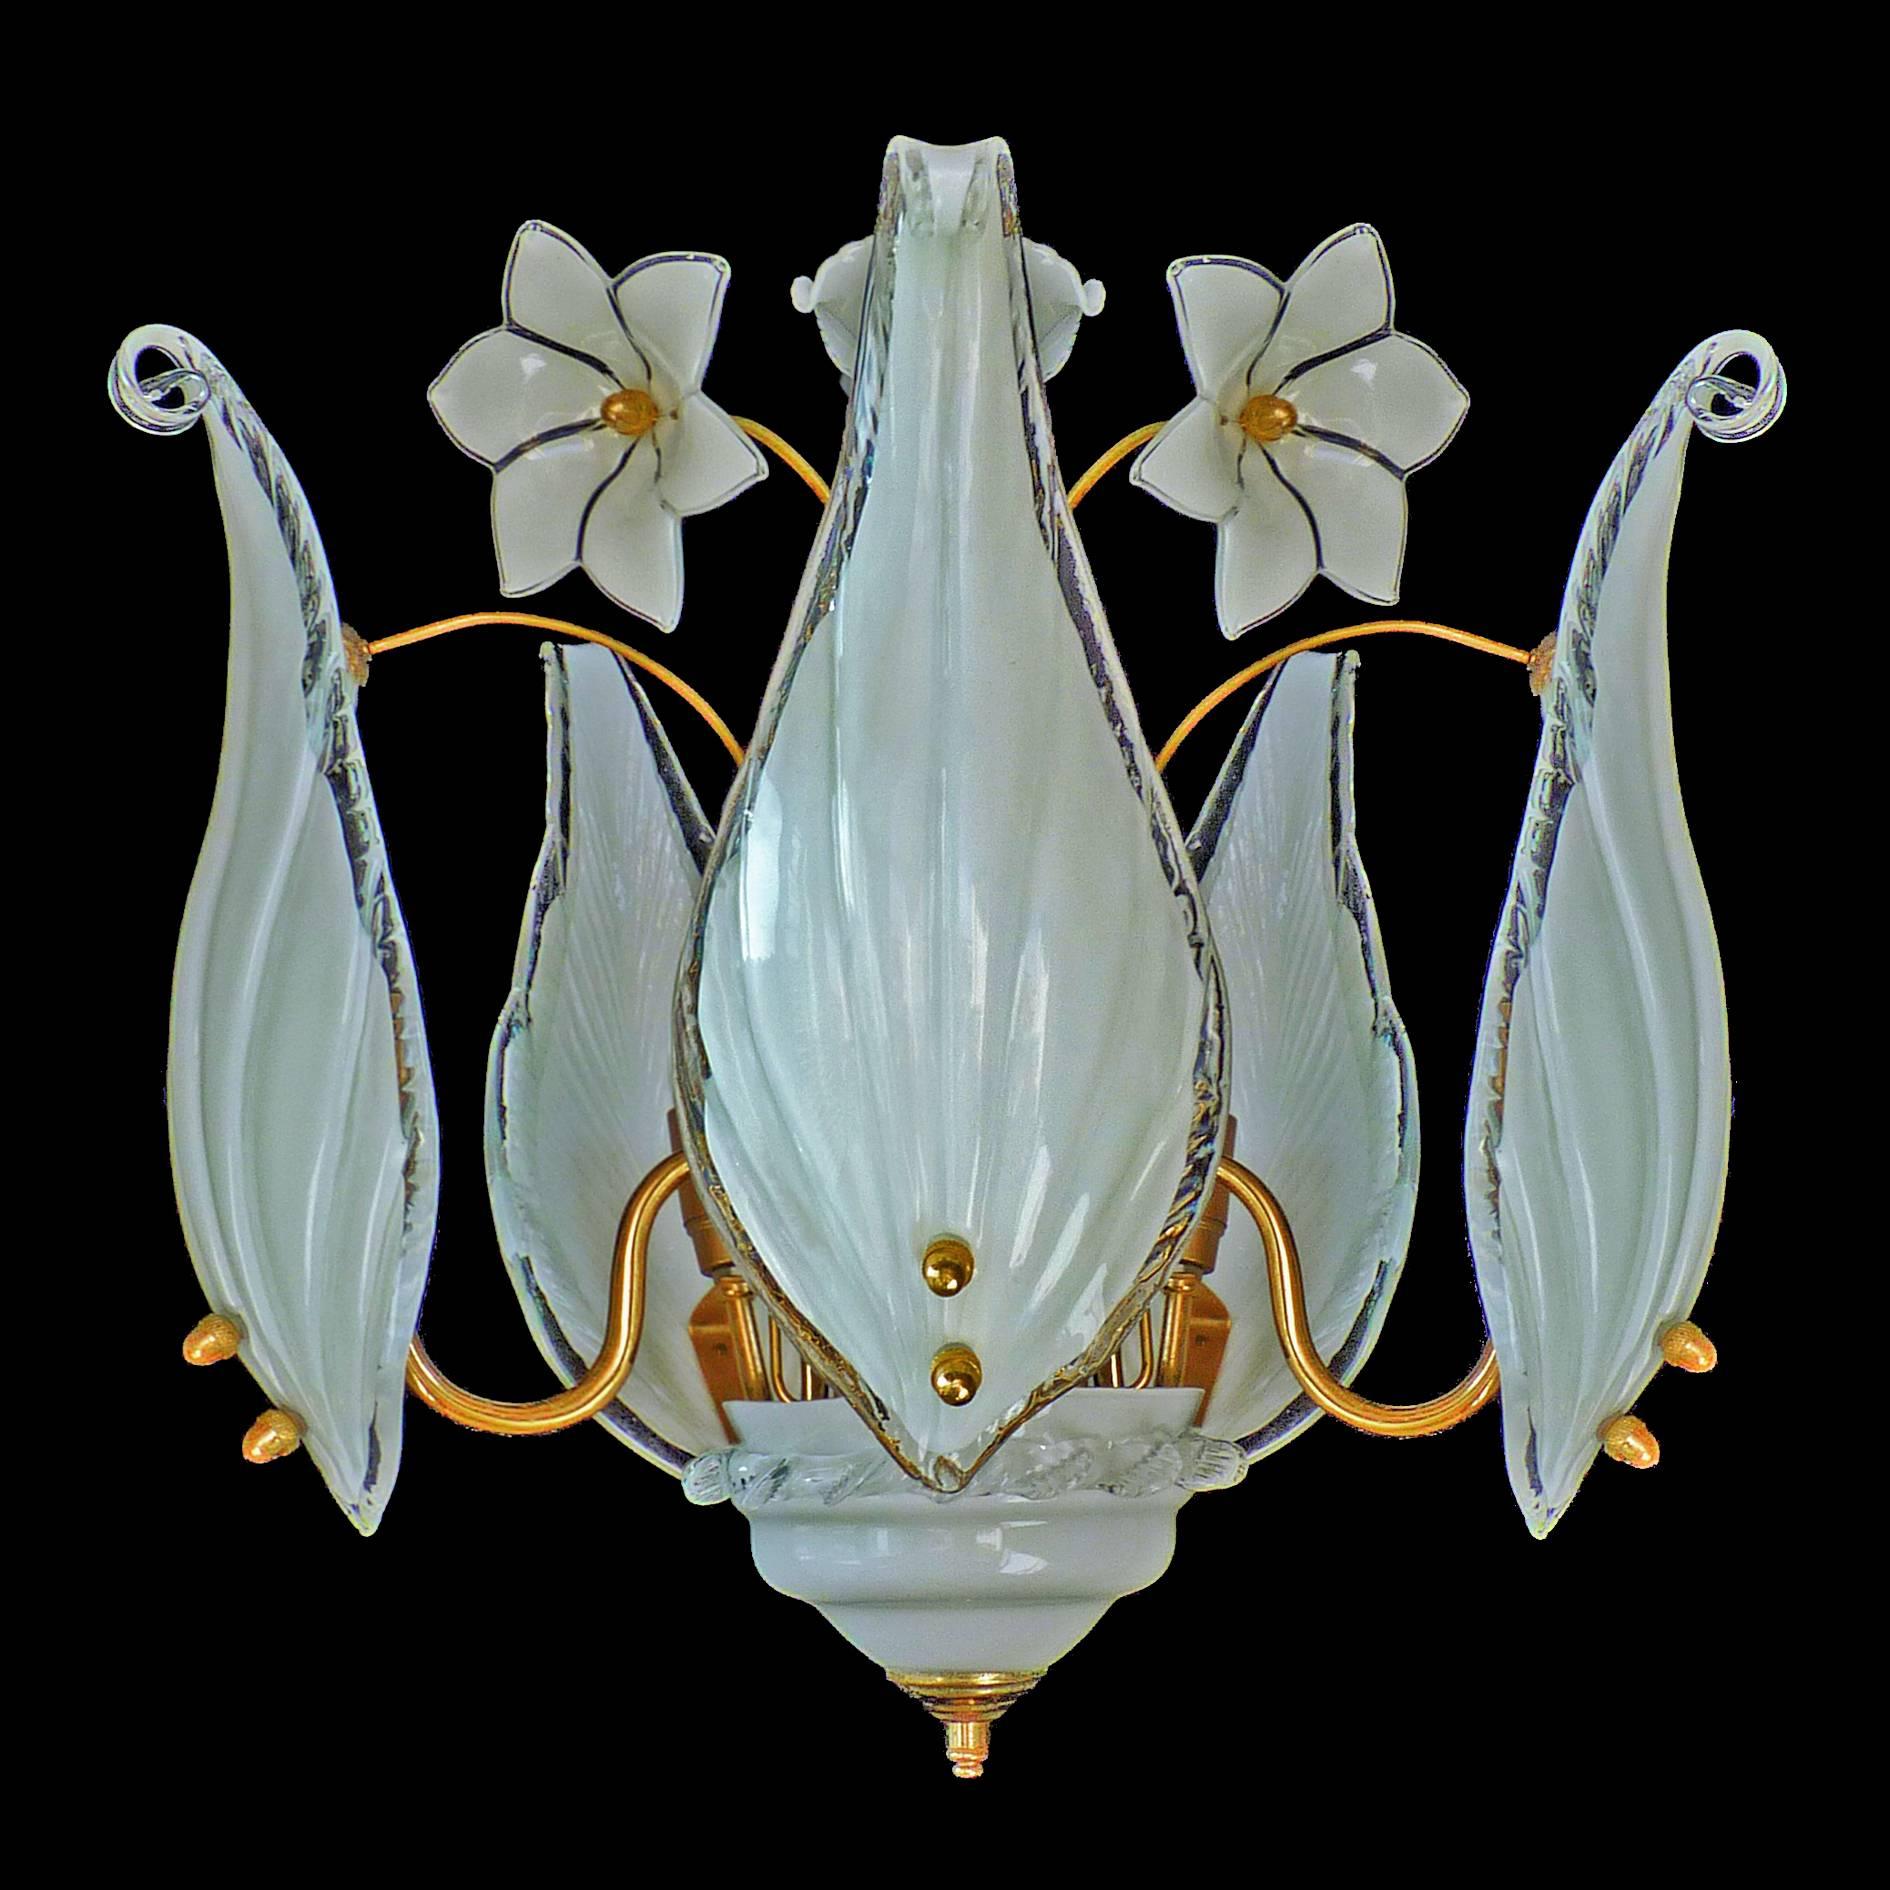 Awesome pair of 1970s vintage Italian Murano Lily Calla art-hlass shades gilt chandelier and flower bouquet. Franco Luce Seguso chandelier with five handblown Murano glass leaves, white and clear glass flowers and gold-plated